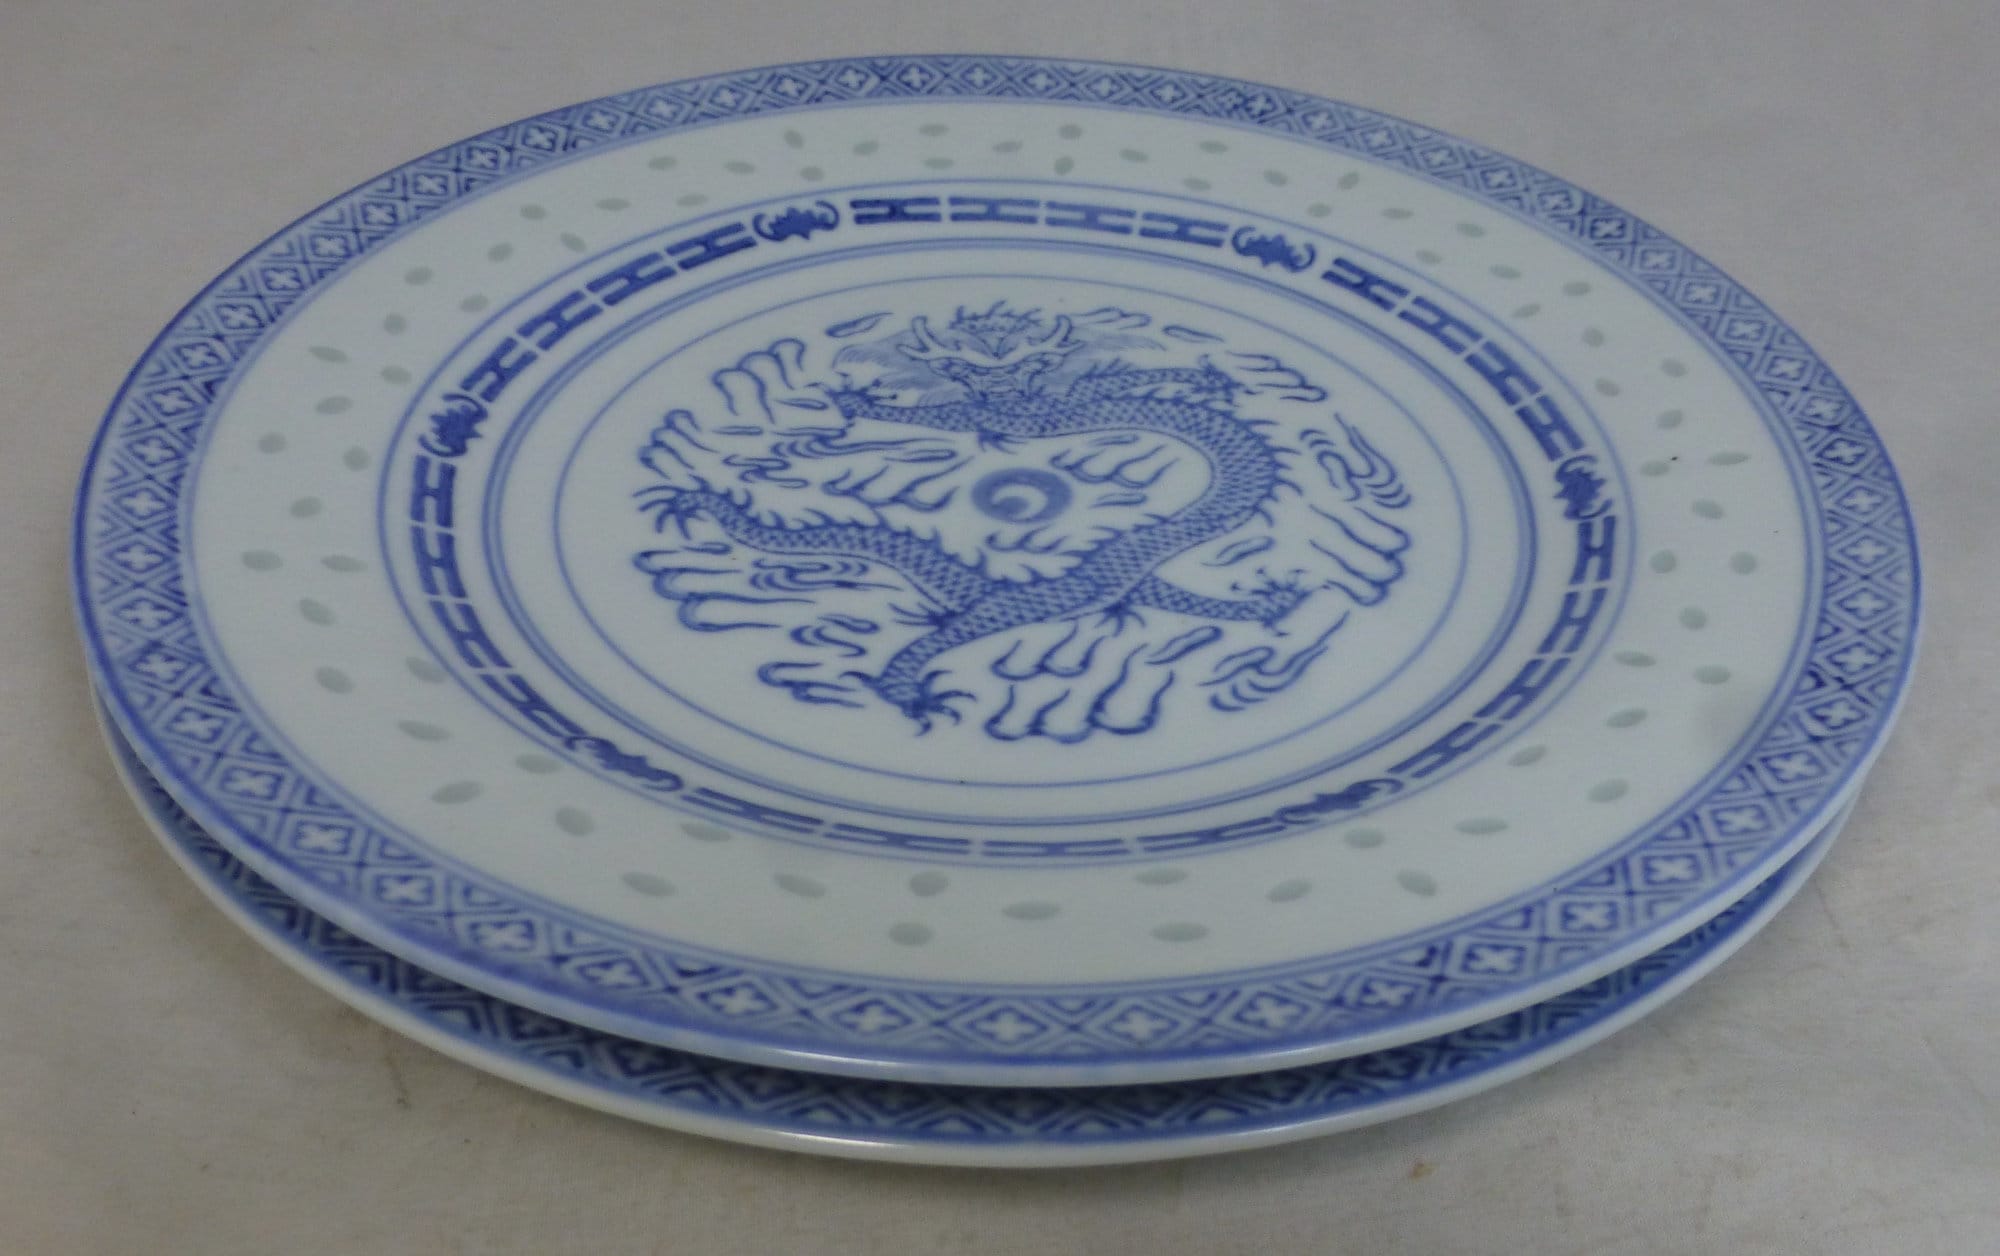 Fierce Dragon Centre Made in China Plates Tienshan Chinese Set of 3 Rice Grain Blue & White Vintage Porcelain Plates 8 inch D Rice Eye